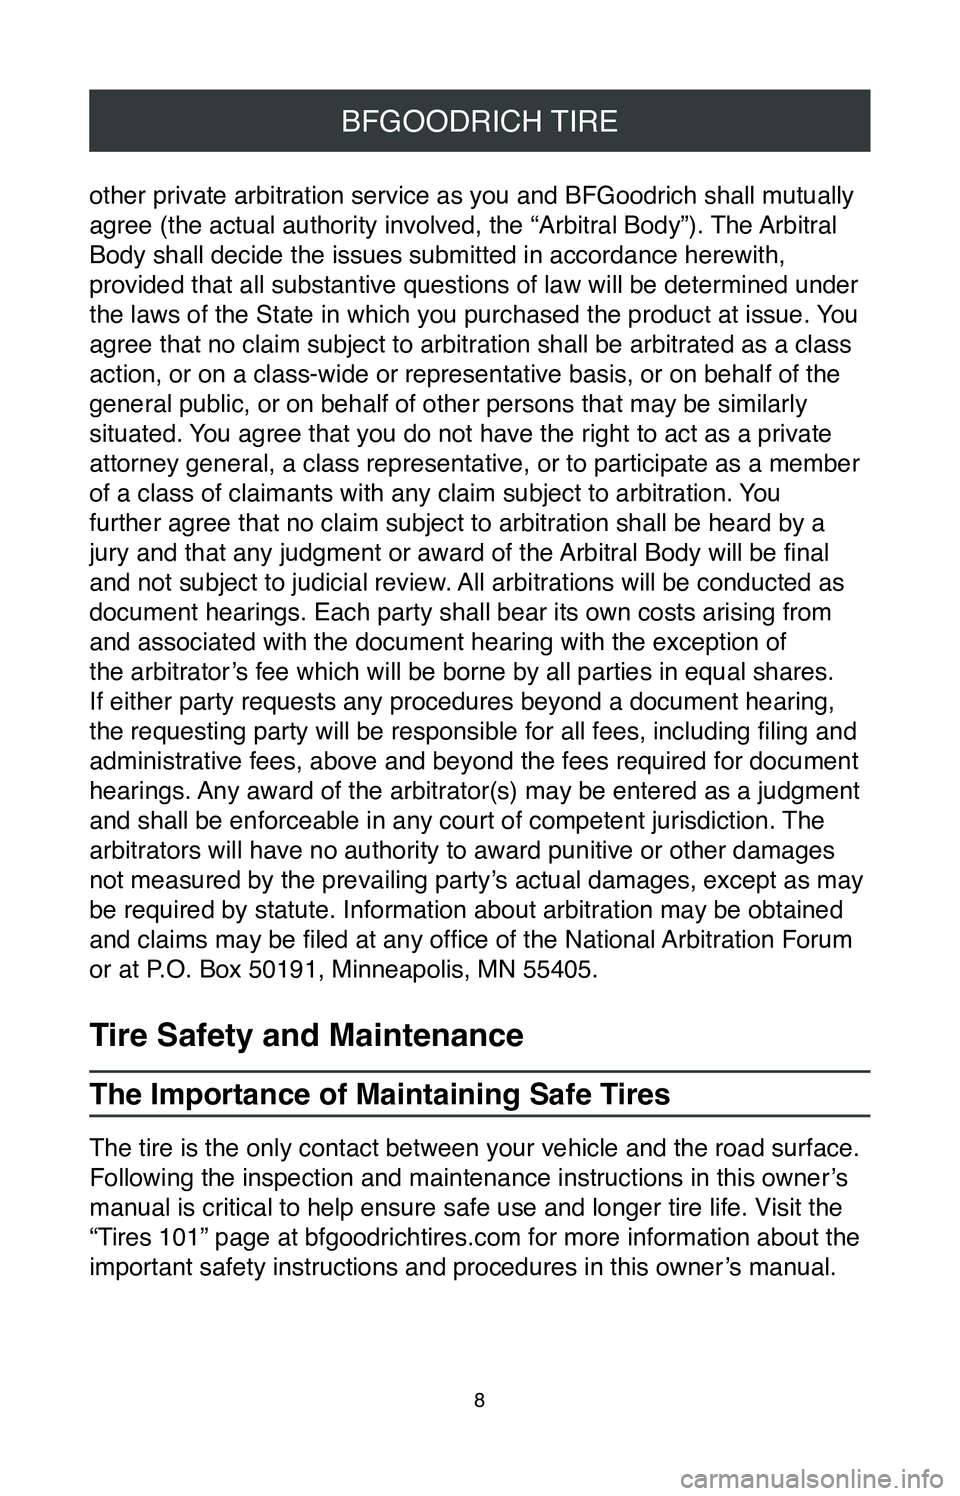 TOYOTA CAMRY 2020  Warranties & Maintenance Guides (in English) 8
BFGOODRICH TIRE
other private arbitration service as you and BFGoodrich shall mutually 
agree (the actual authority involved, the “Arbitral Body”). The Arbitral 
Body shall decide the issues sub